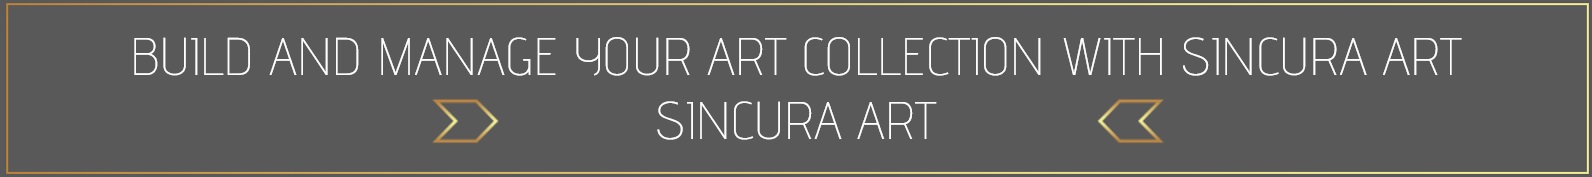 contact the sincura team for sourcing luxury goods and collectibles such as artwork